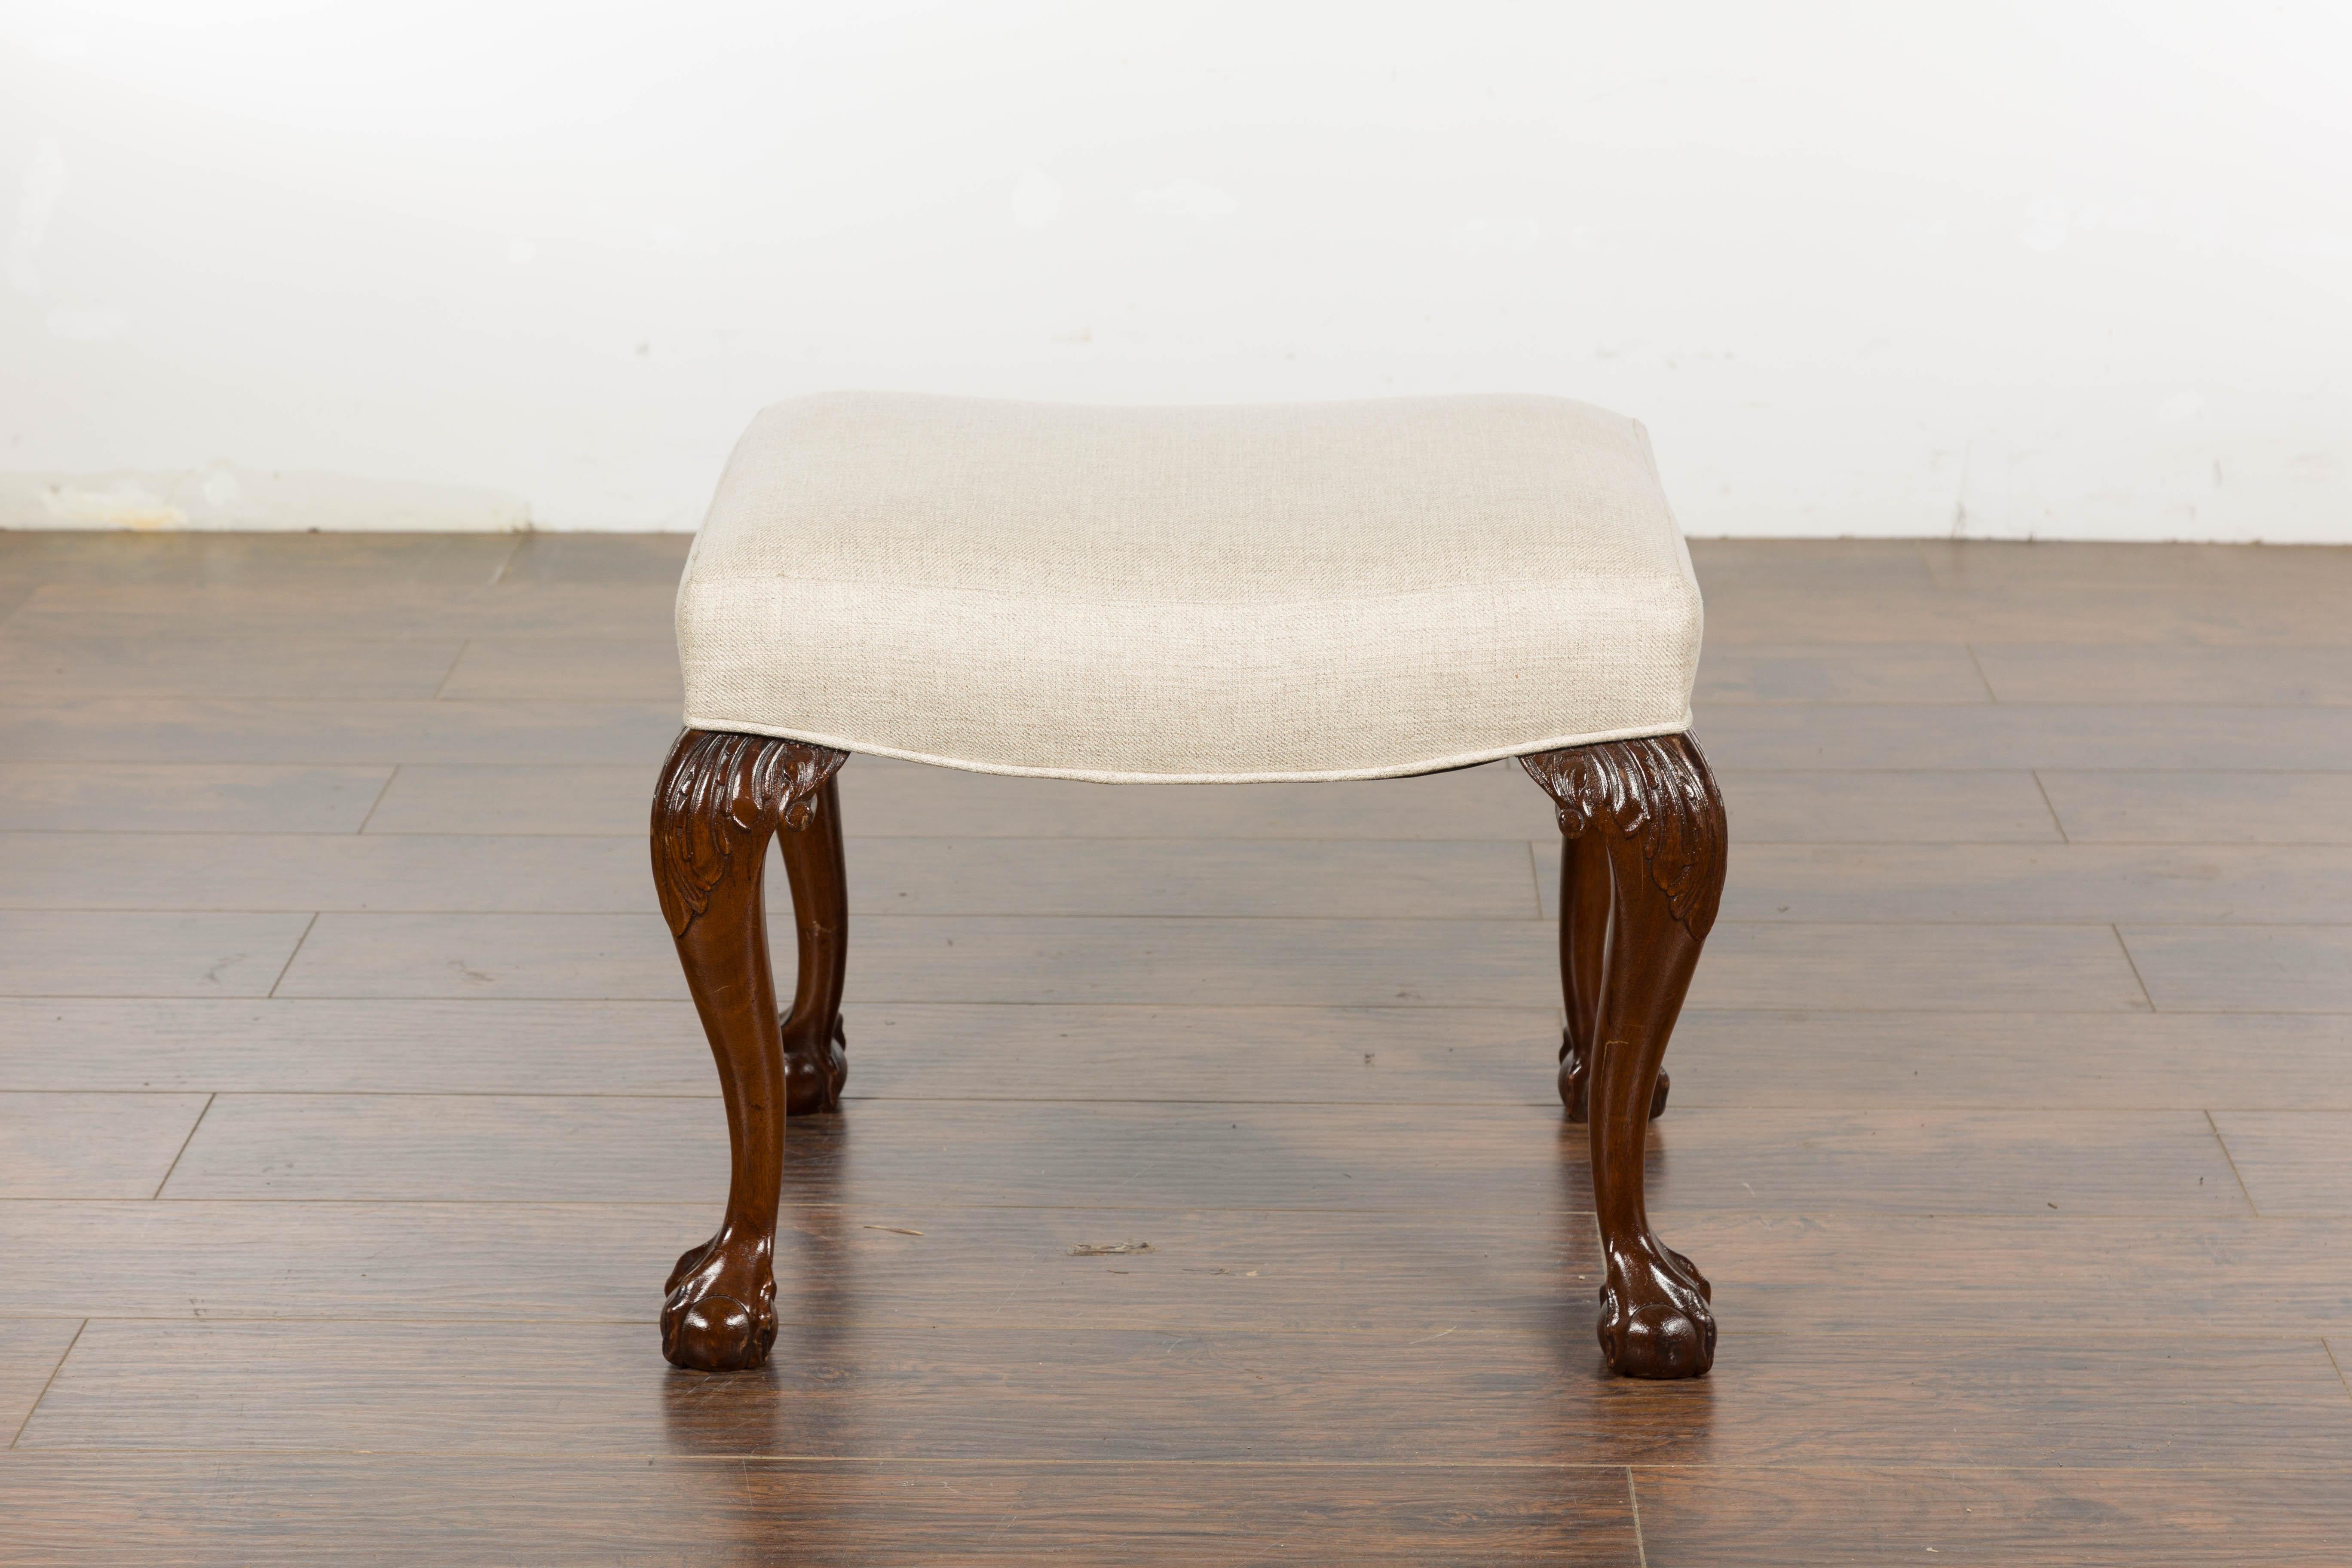 19th Century English Mahogany Upholstered Stool with Cabriole Legs In Good Condition For Sale In Atlanta, GA